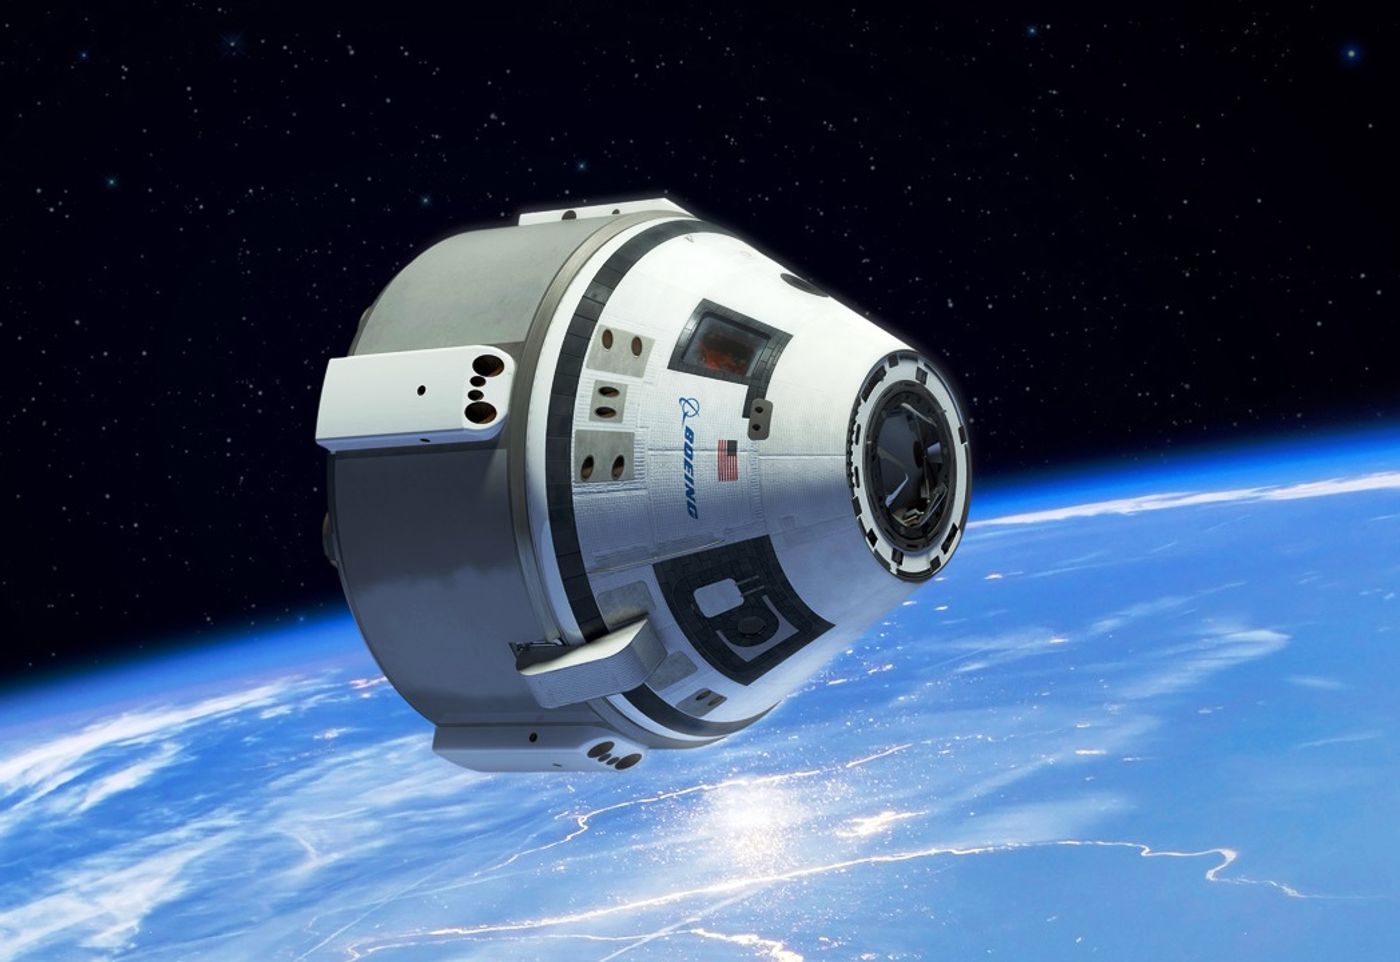 An artist's impression of the Boeing Starliner spacecraft in space after launch.